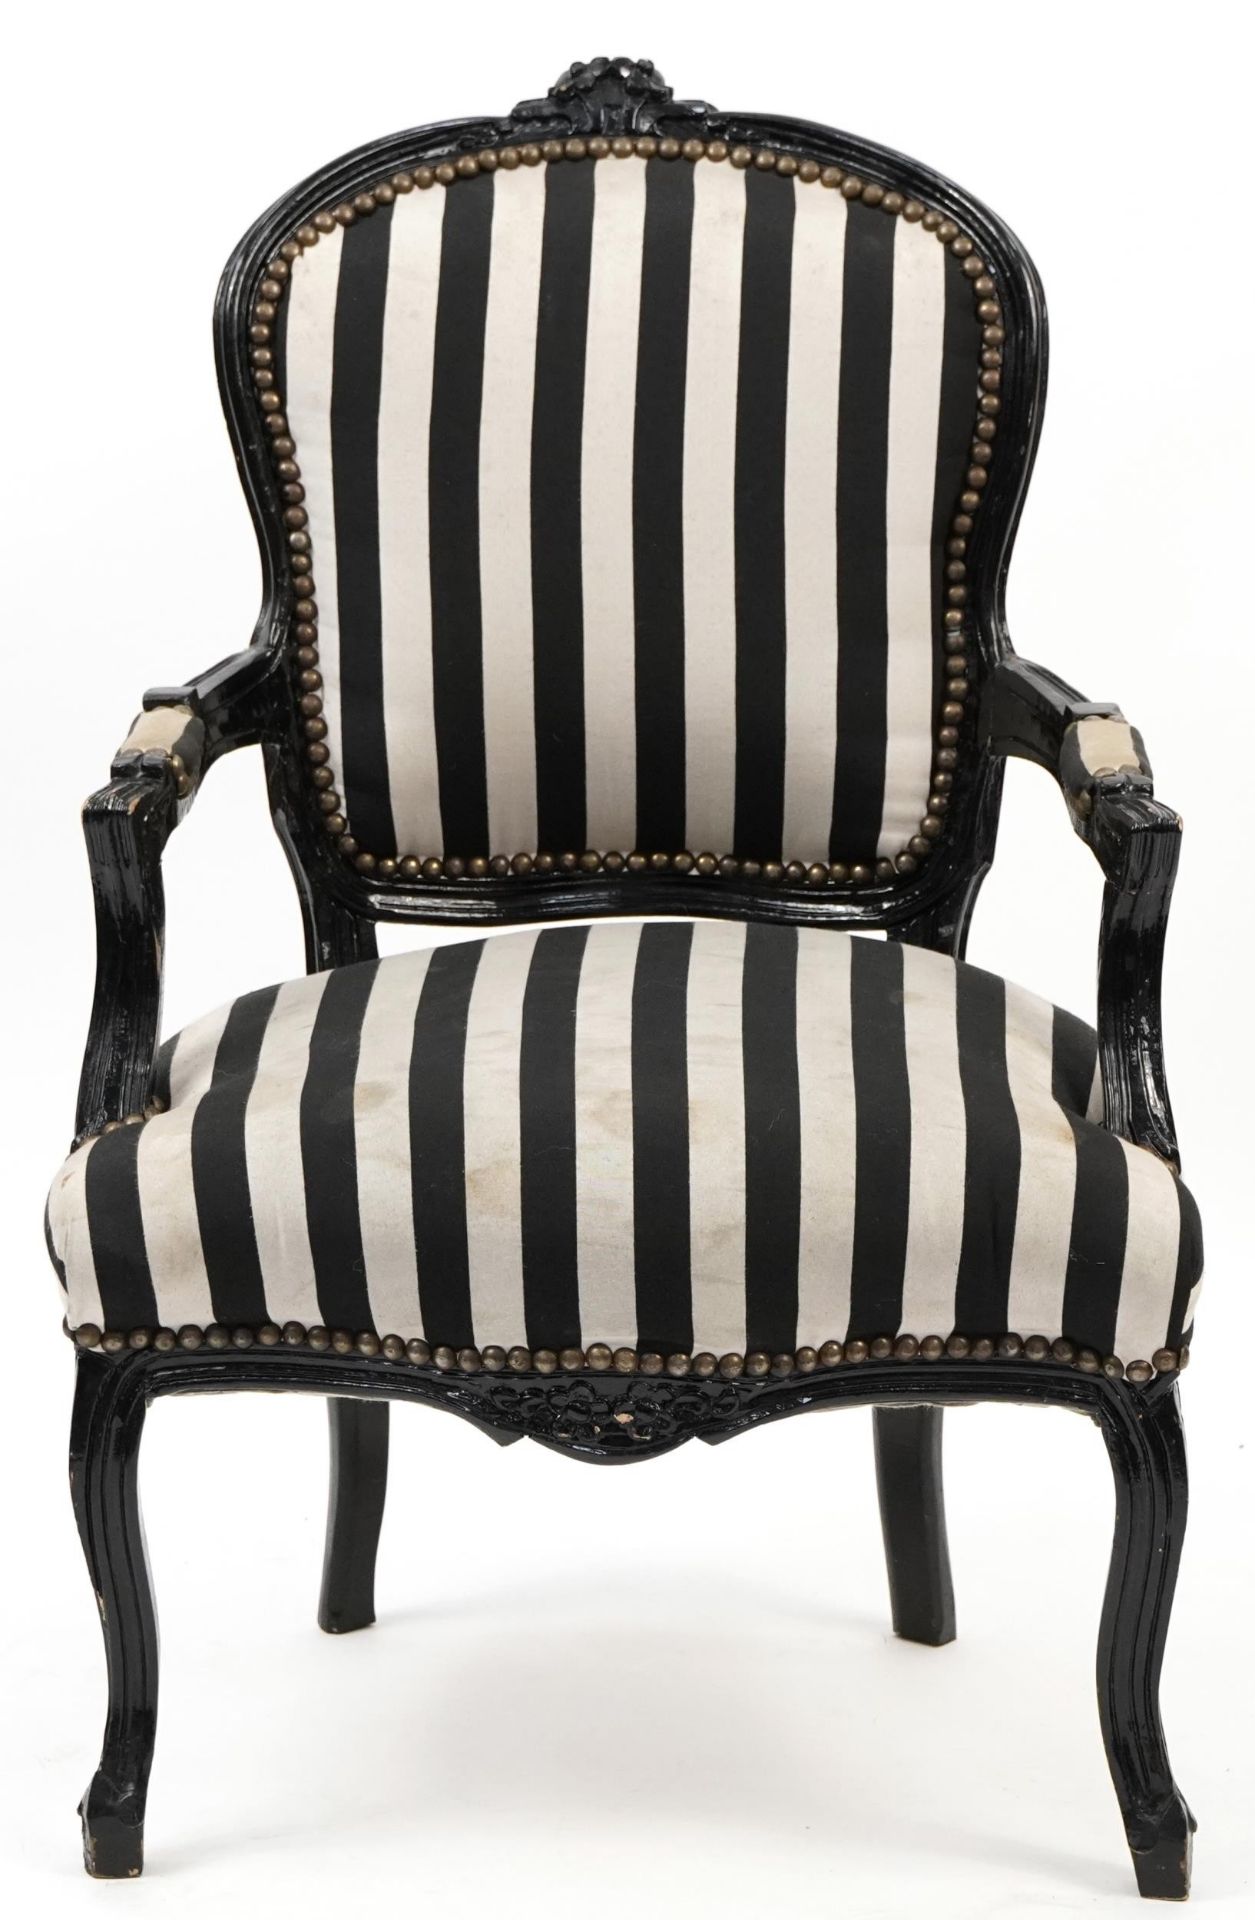 French style black painted elbow chair with black and white striped upholstery, 92cm high - Image 2 of 3